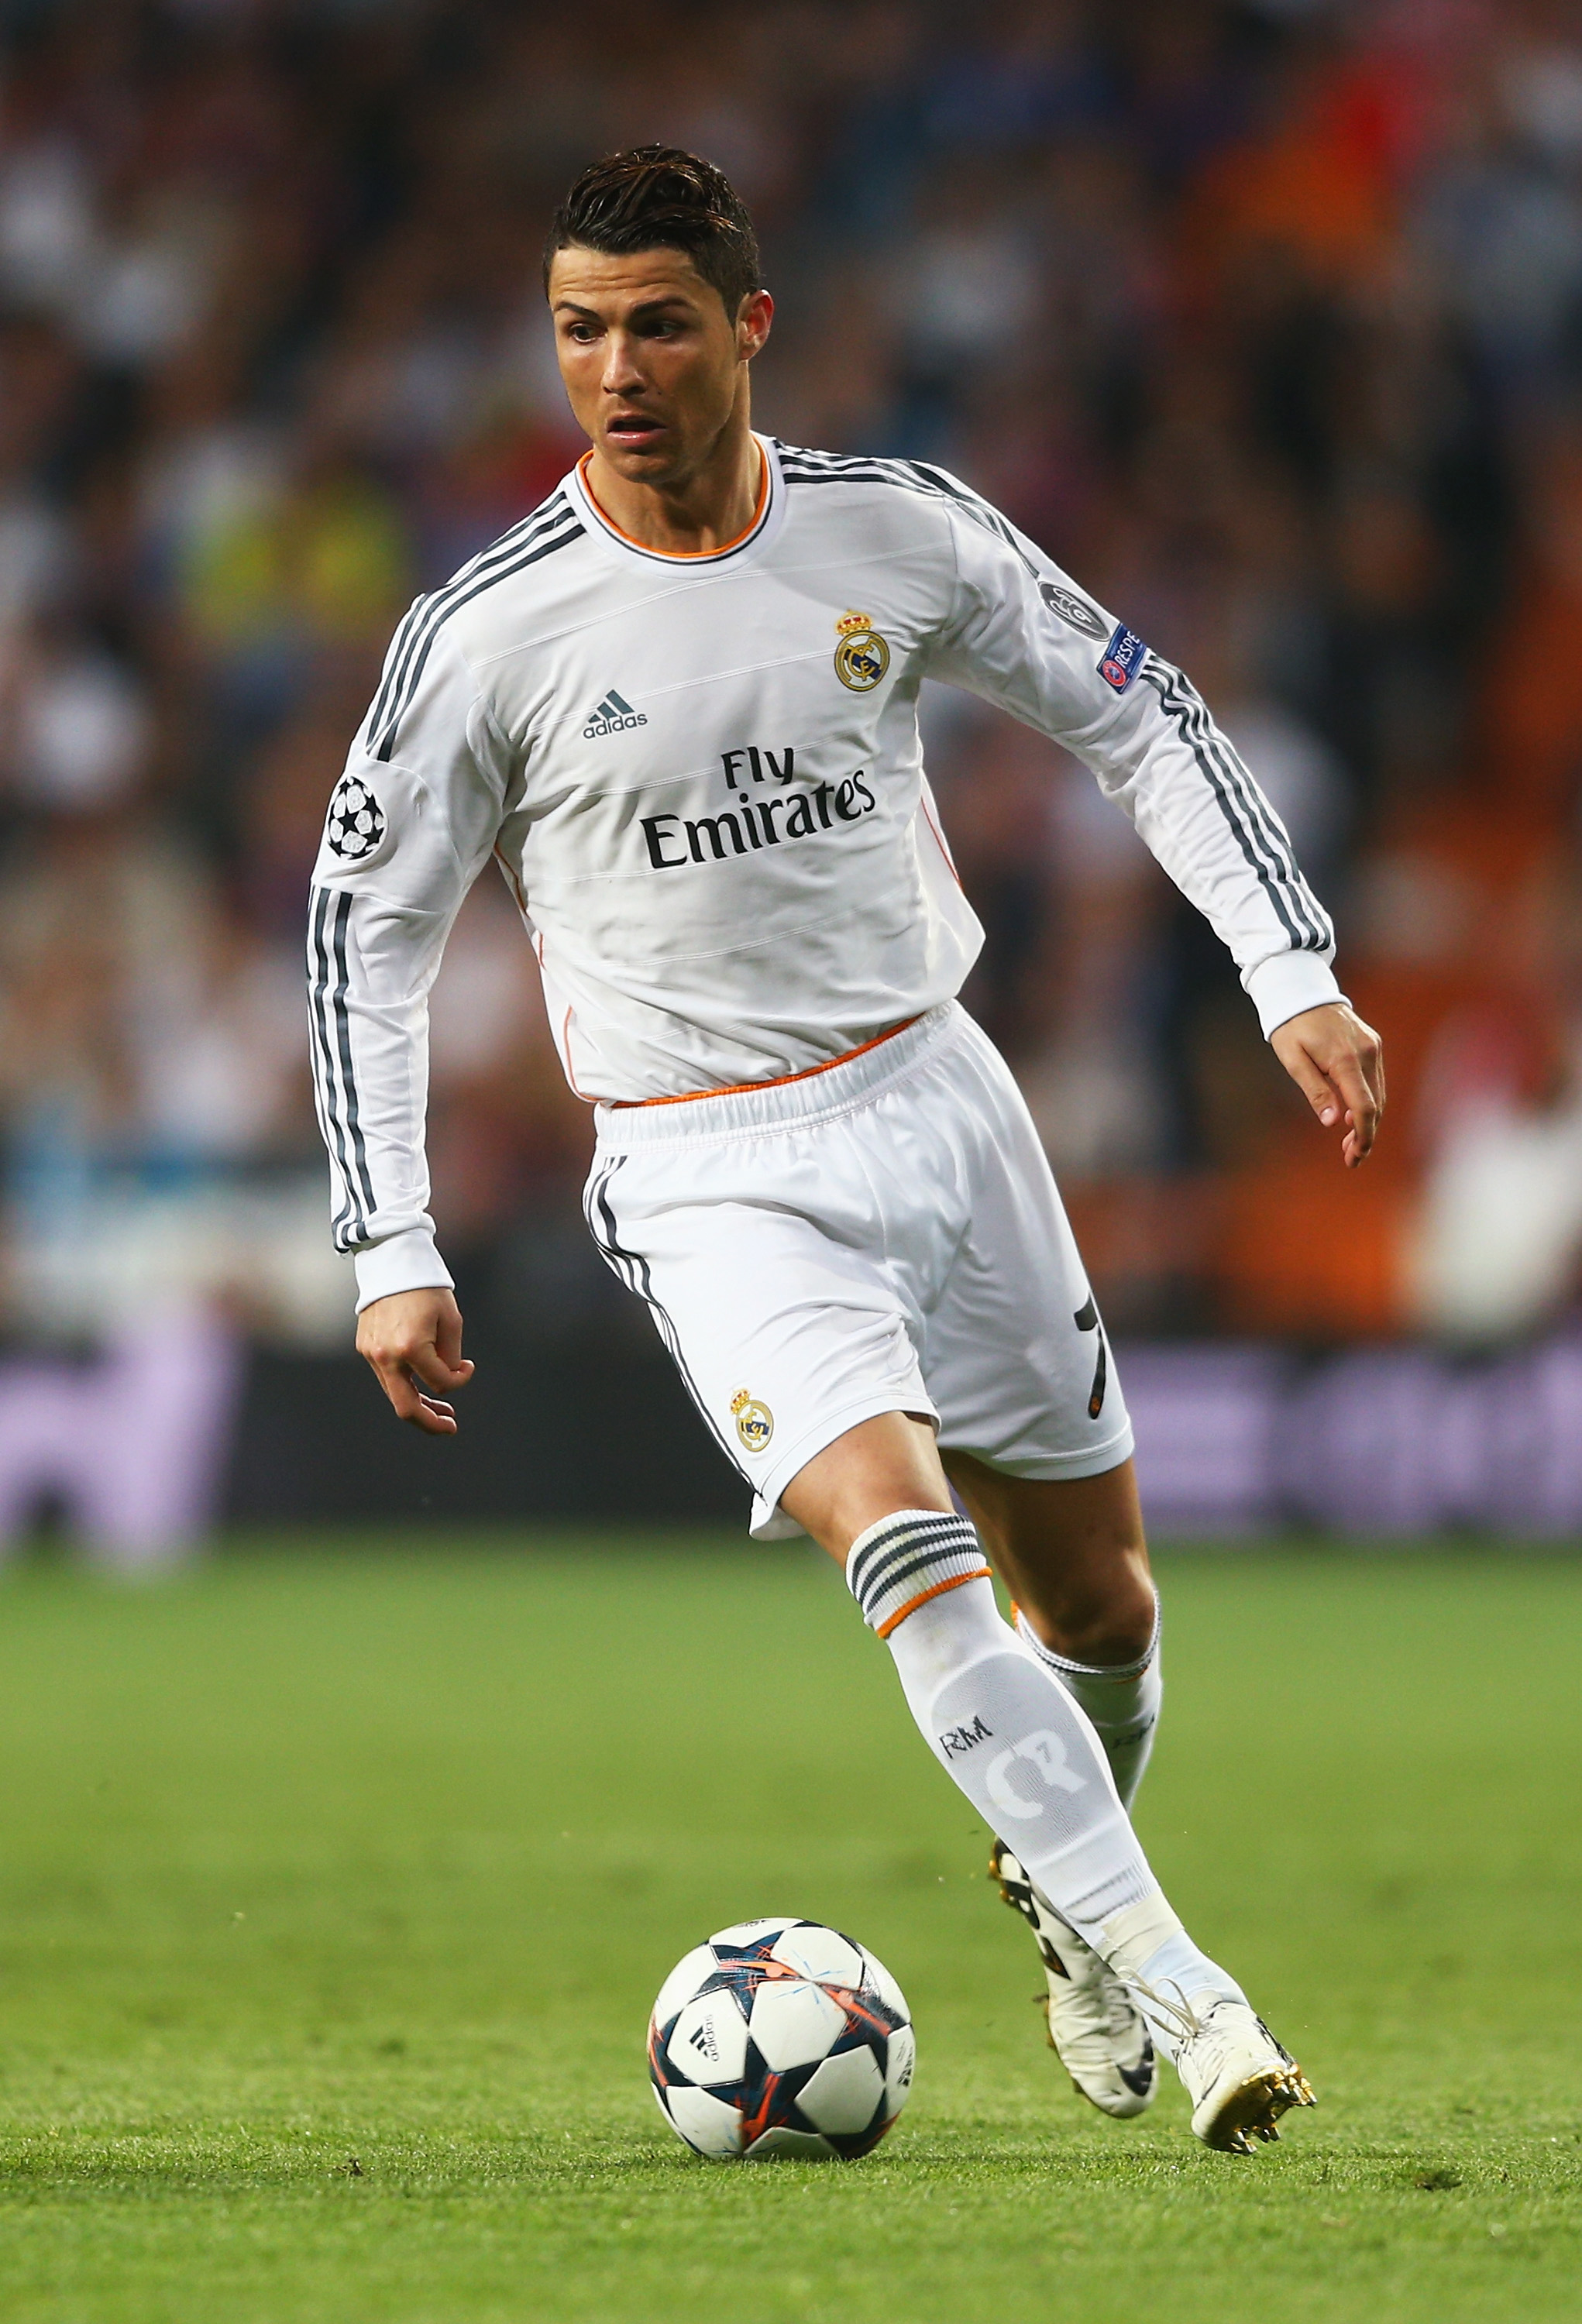 Wallpapers Ronaldo Android